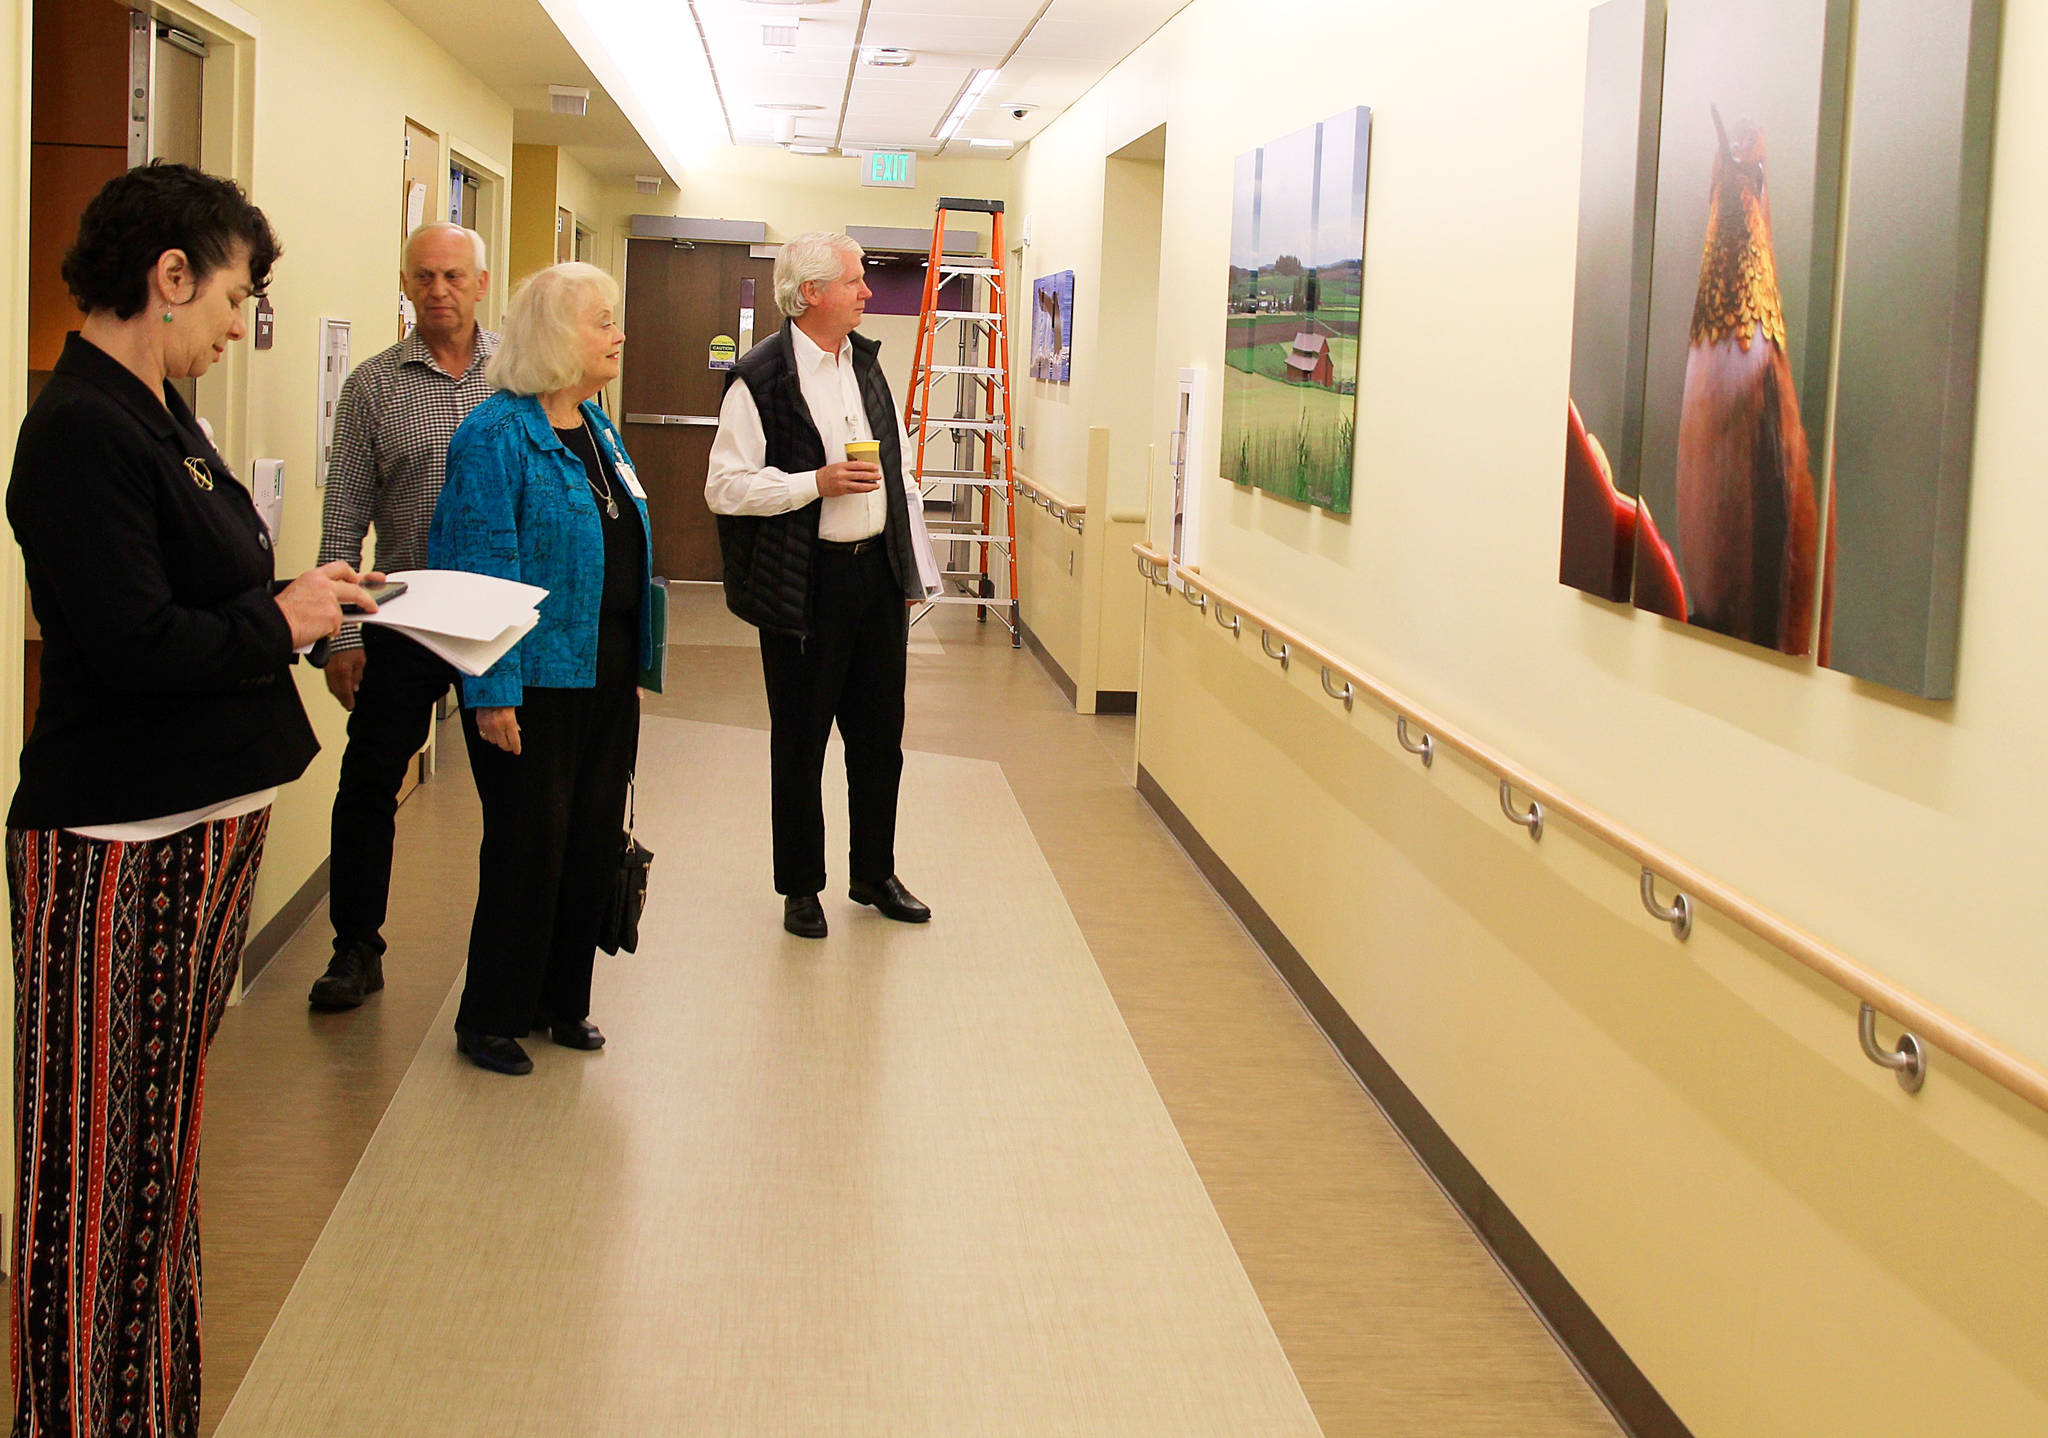 WhidbeyHealth media liason Patricia Duff (far left) takes board commissioners Ron Wallin (left) Nancyjean Fey (center) and Kurt Blankenship on a tour of WhidbeyHealth’s new patient wing. It is scheduled to open next week. Photo by Patricia Guthrie/Whidbey News-Times